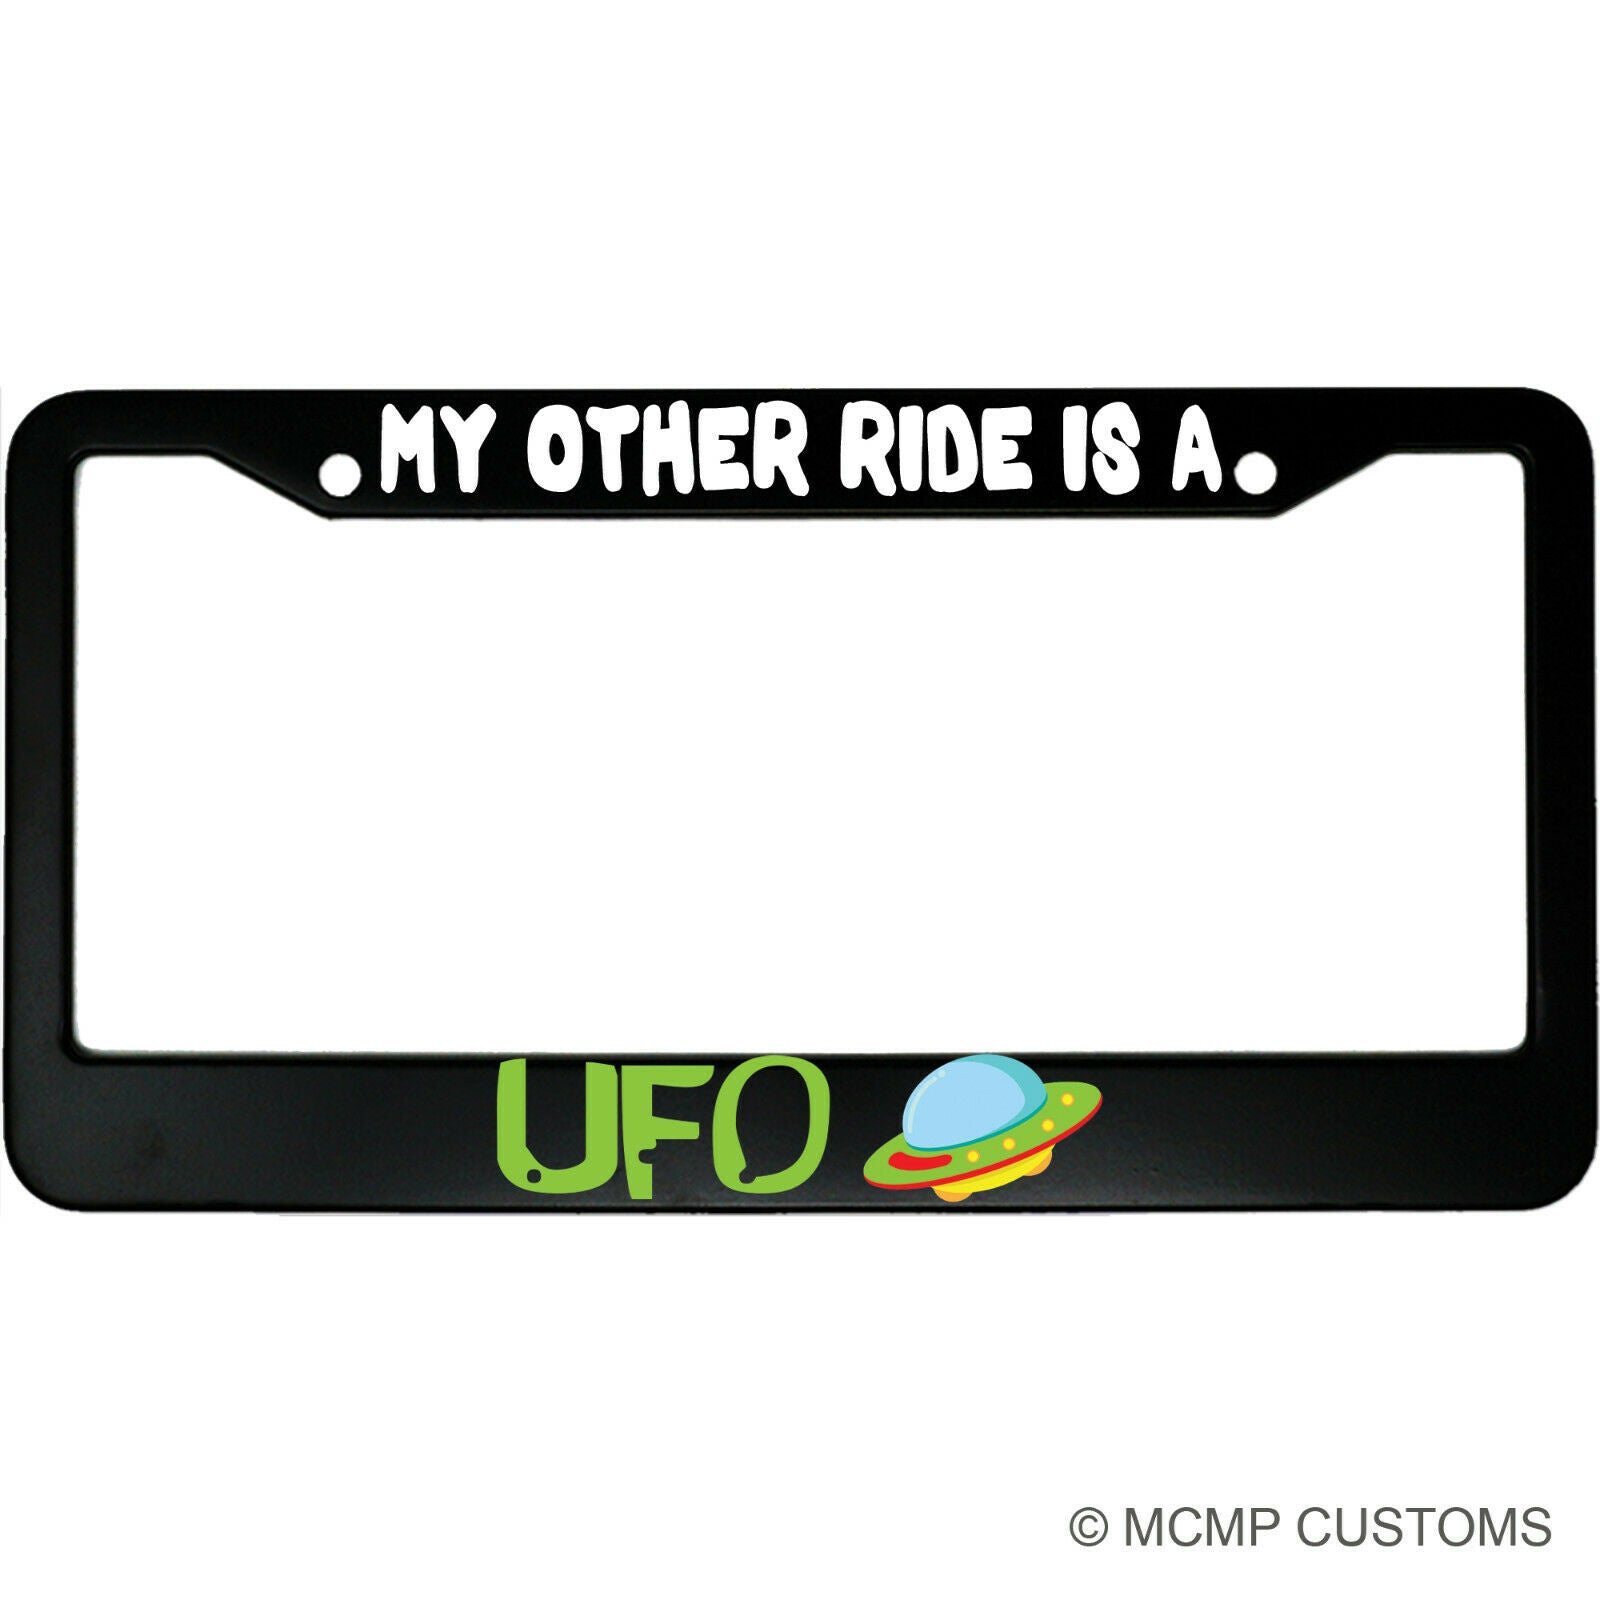 My Other Ride Is A UFO